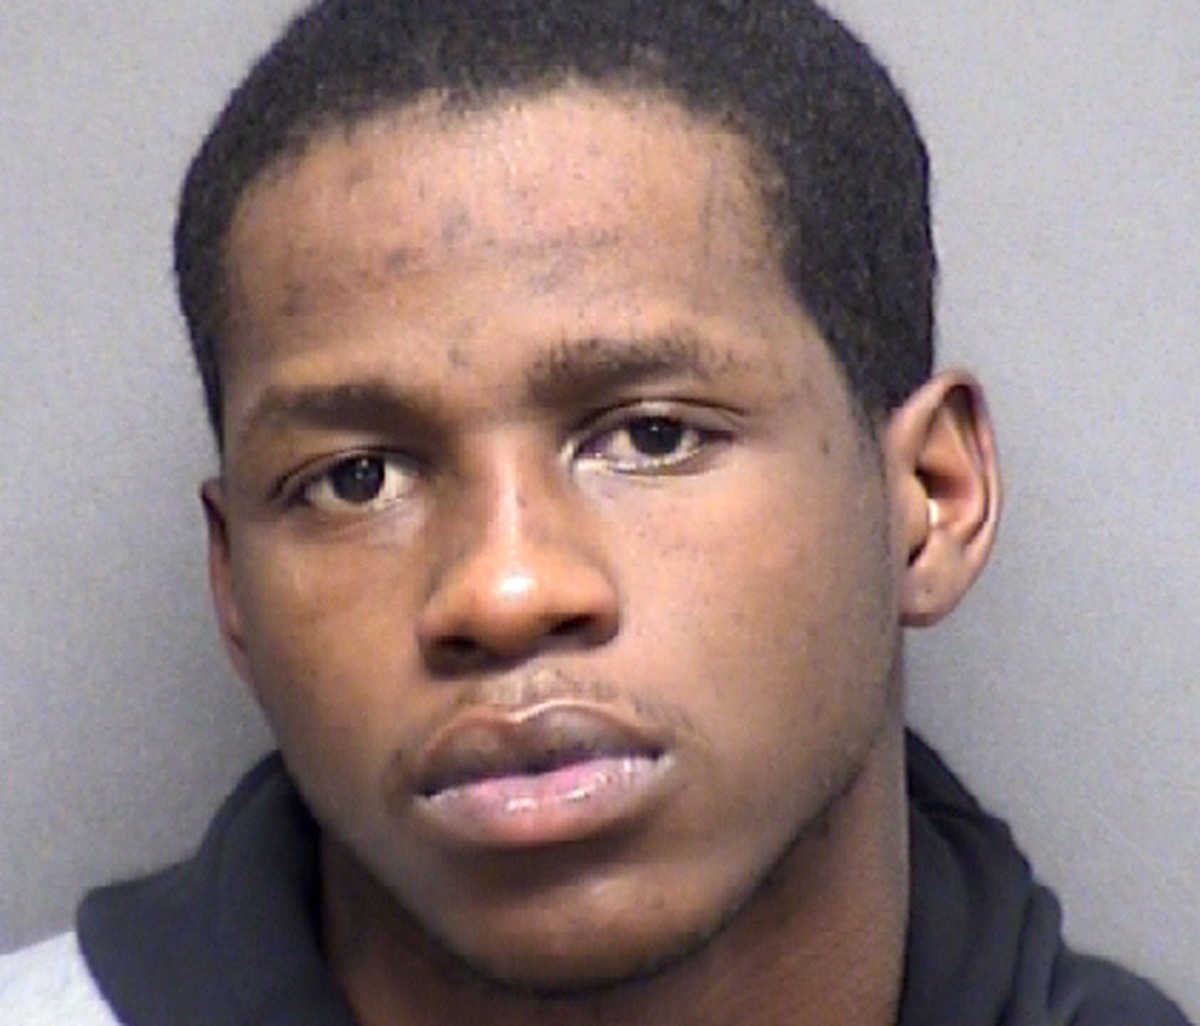 Imond Martise Woods, 22, was charged with murder in connection with the shooting death of Deshaun Adriel Moorer.